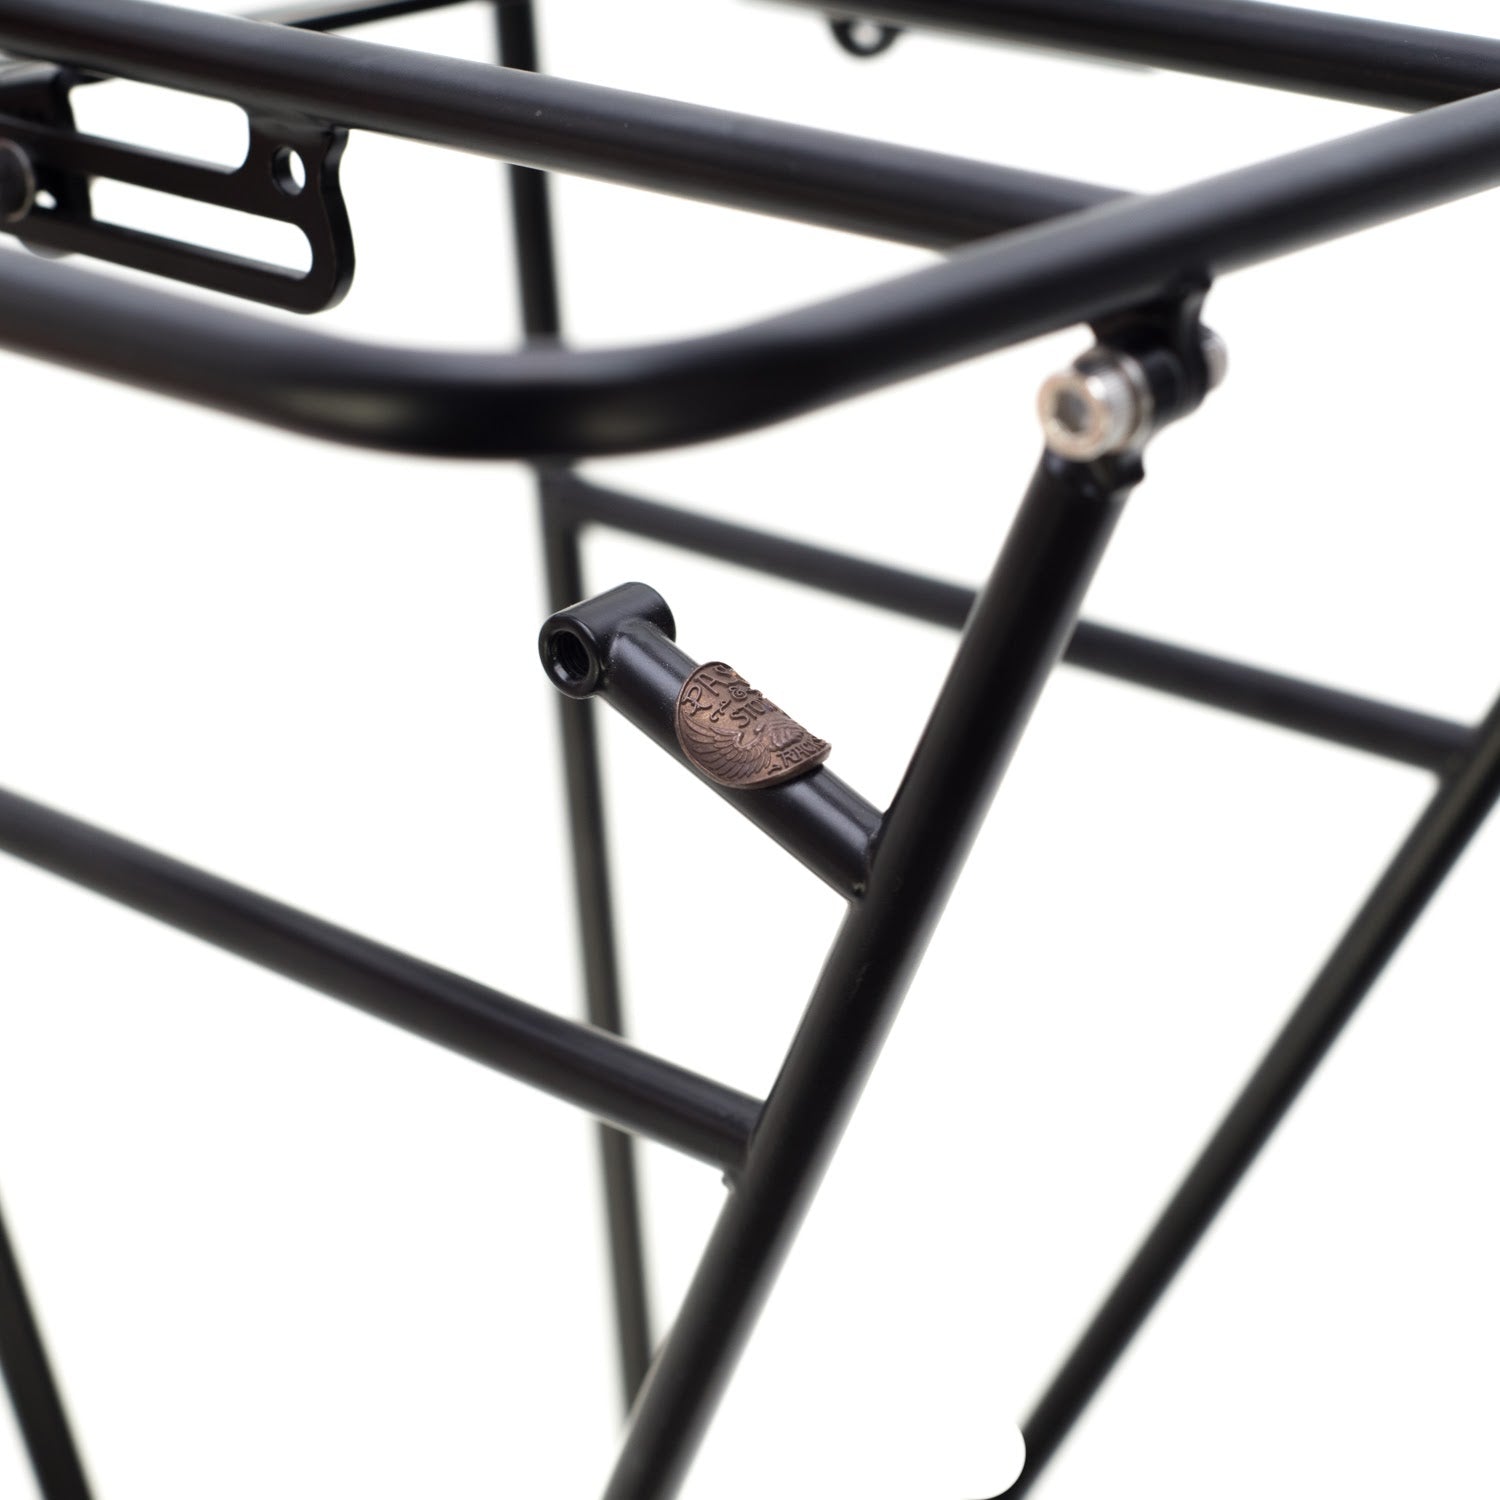 PASS AND STOW 5 Rail Rack (Cargo Cage)